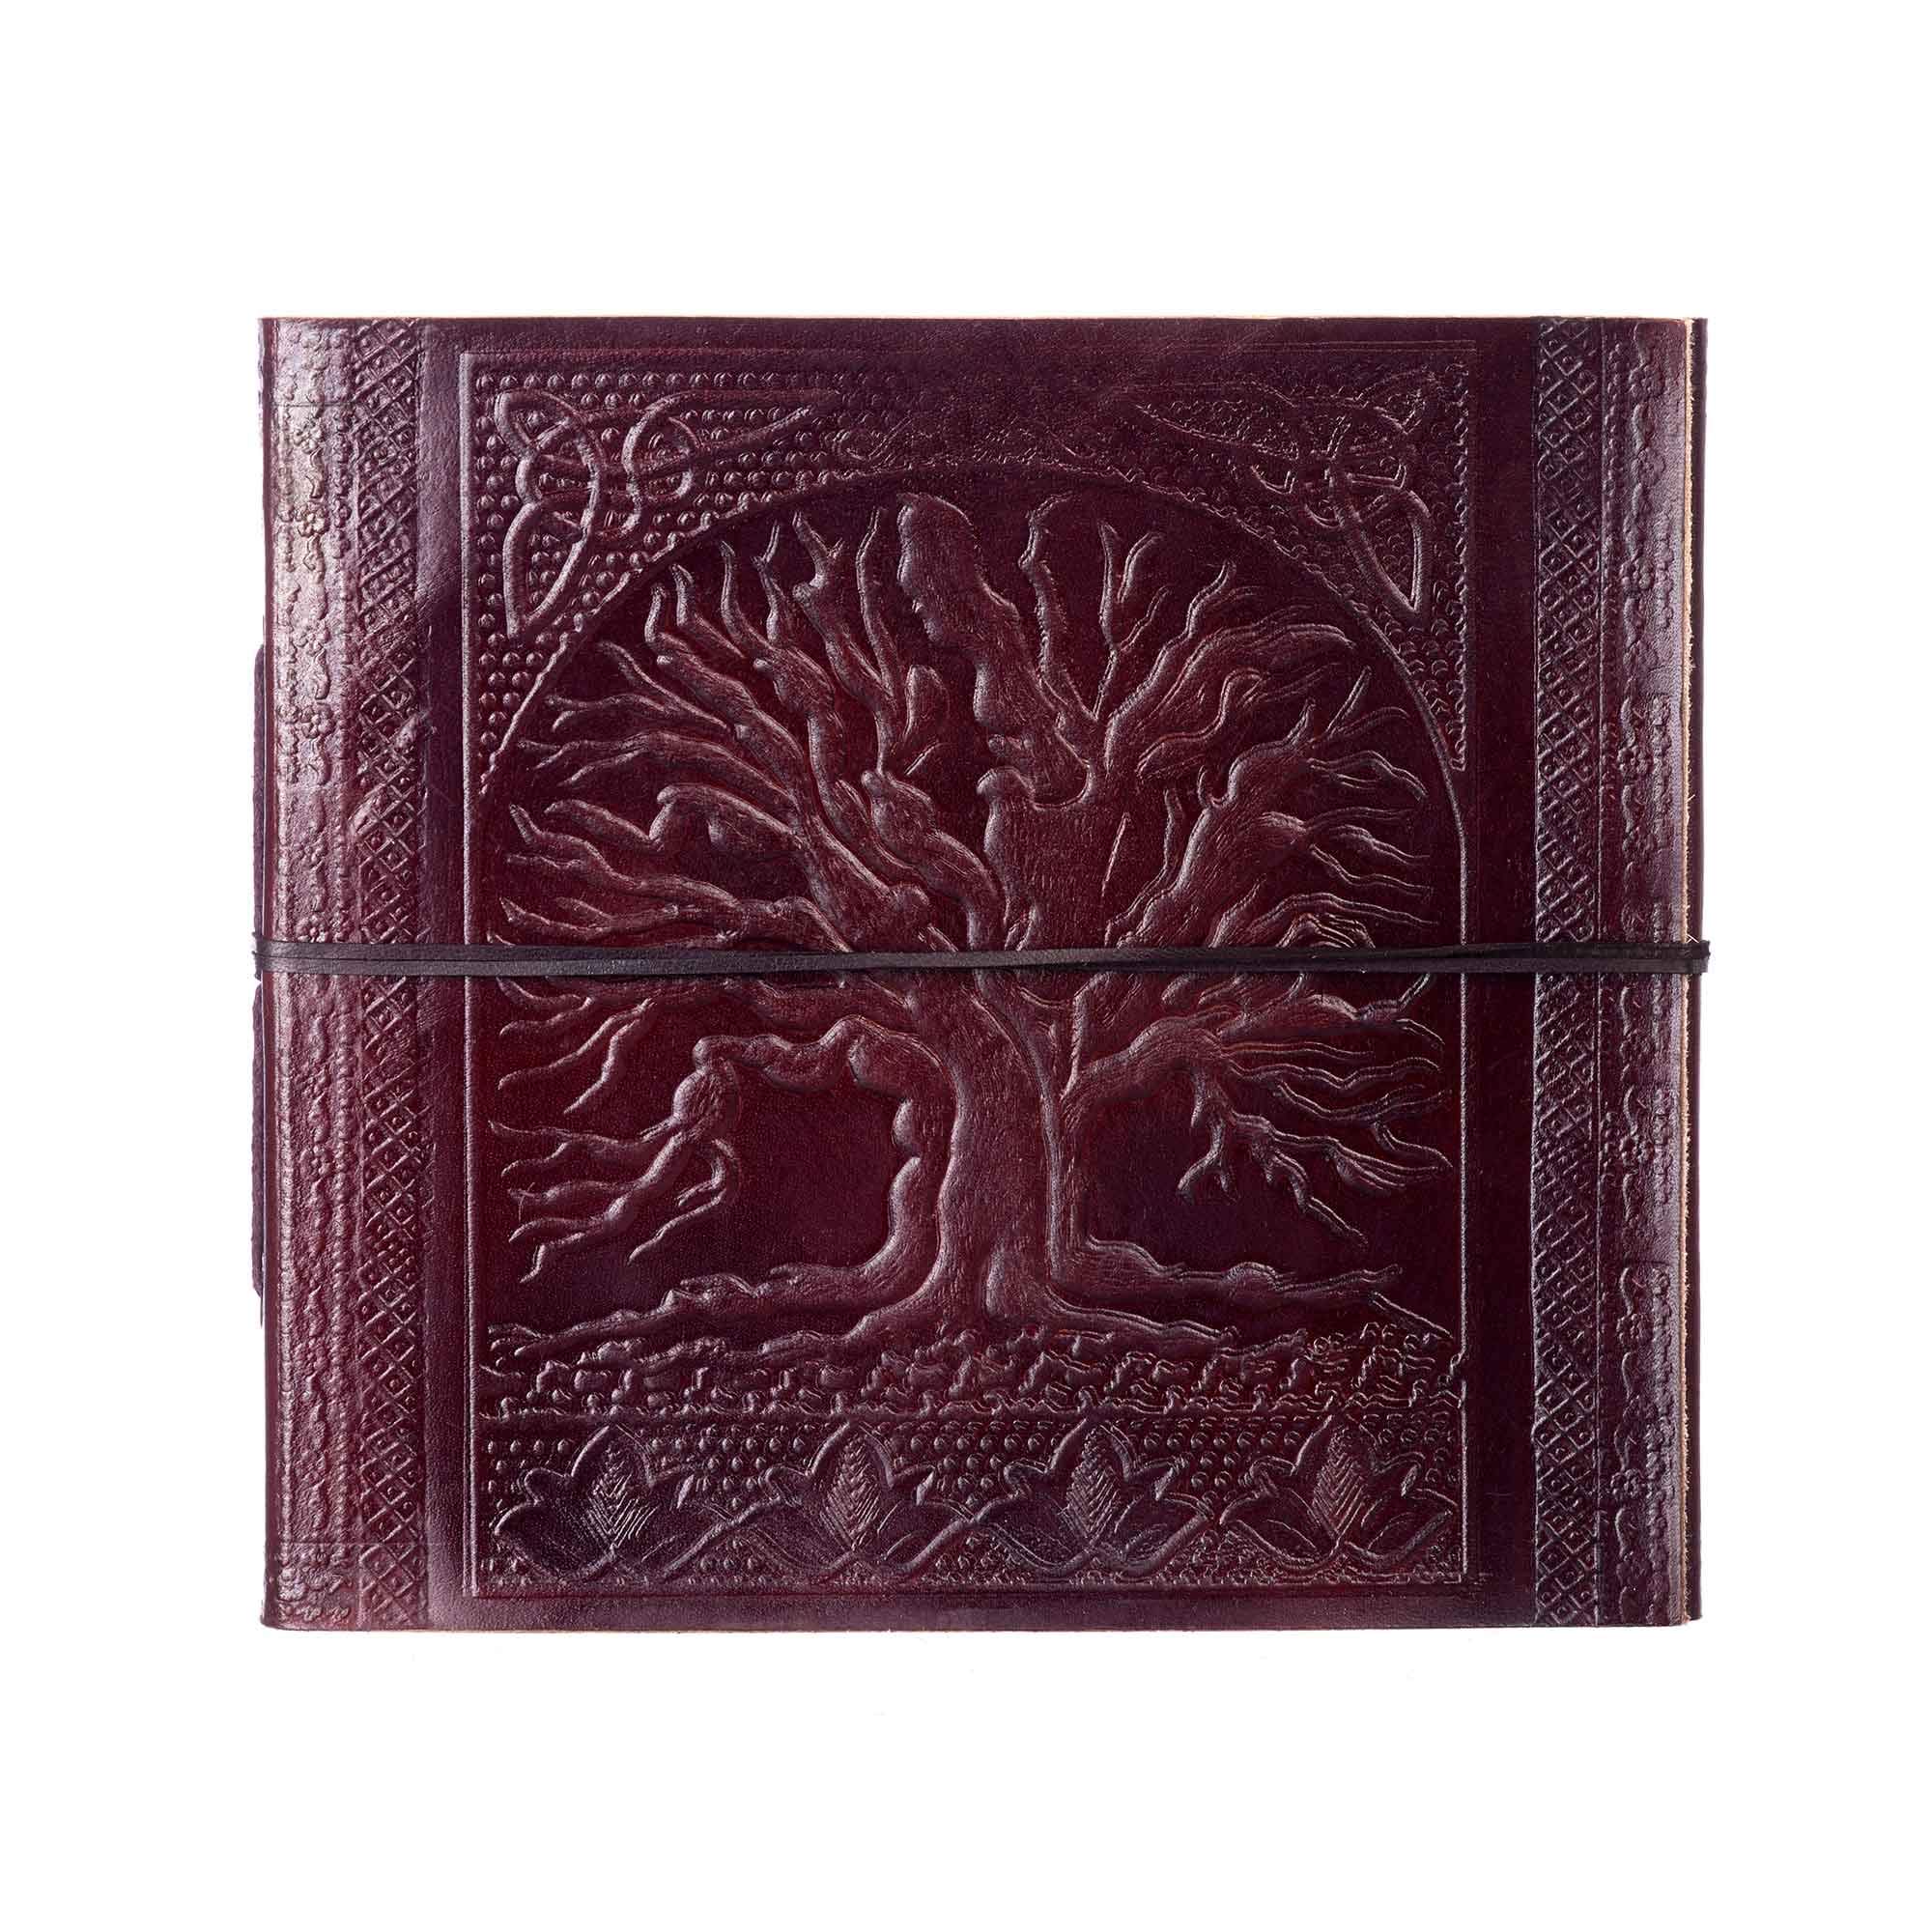 Large Tree Of Life Embossed Leather Photo Album | to fit 120 6x4 or 60 7x5 Photos | 24 x 26 cm | Fair Trade & Handmade